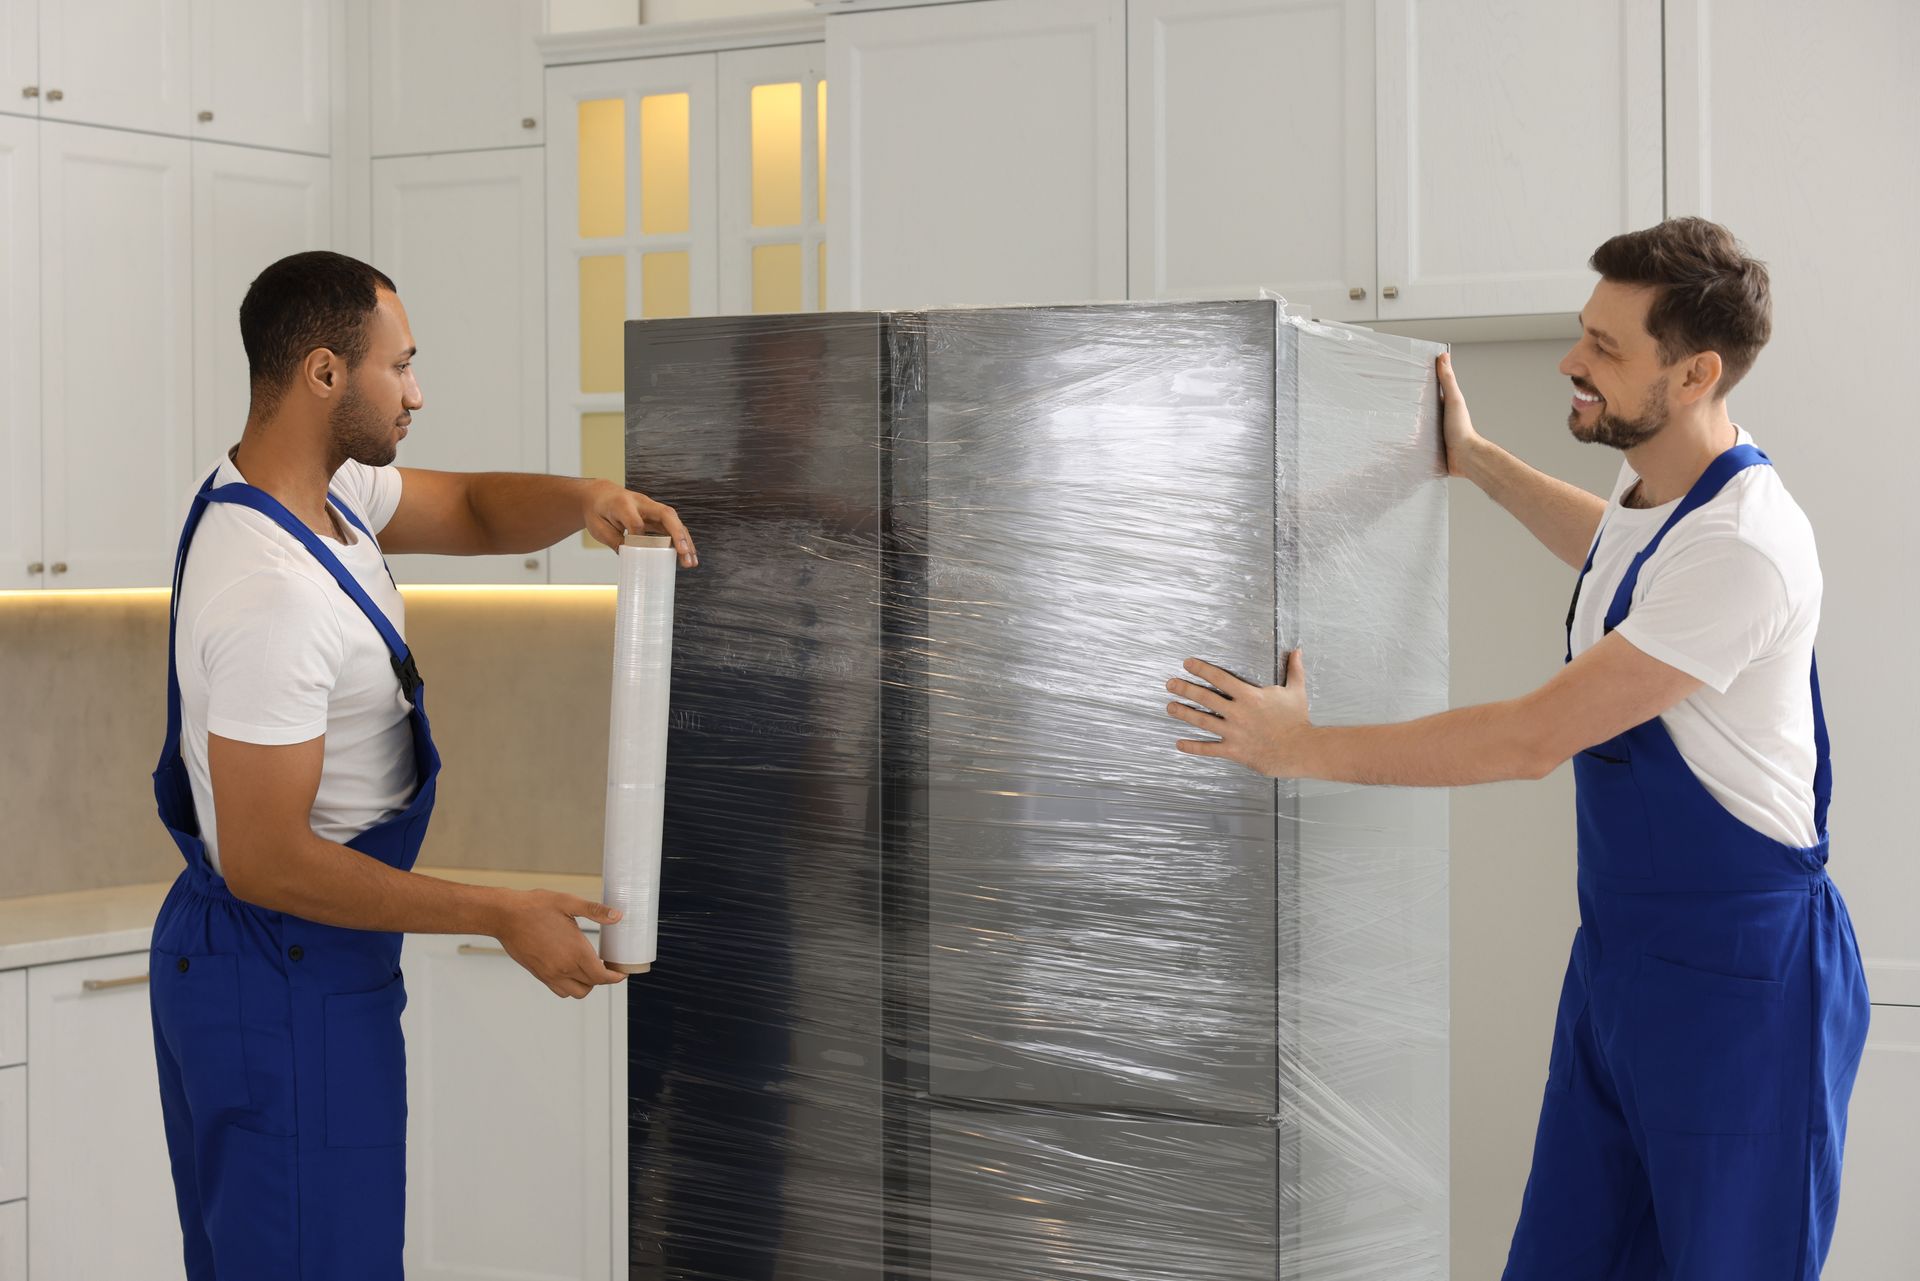 two men are wrapping a refrigerator with plastic wrap in a kitchen .